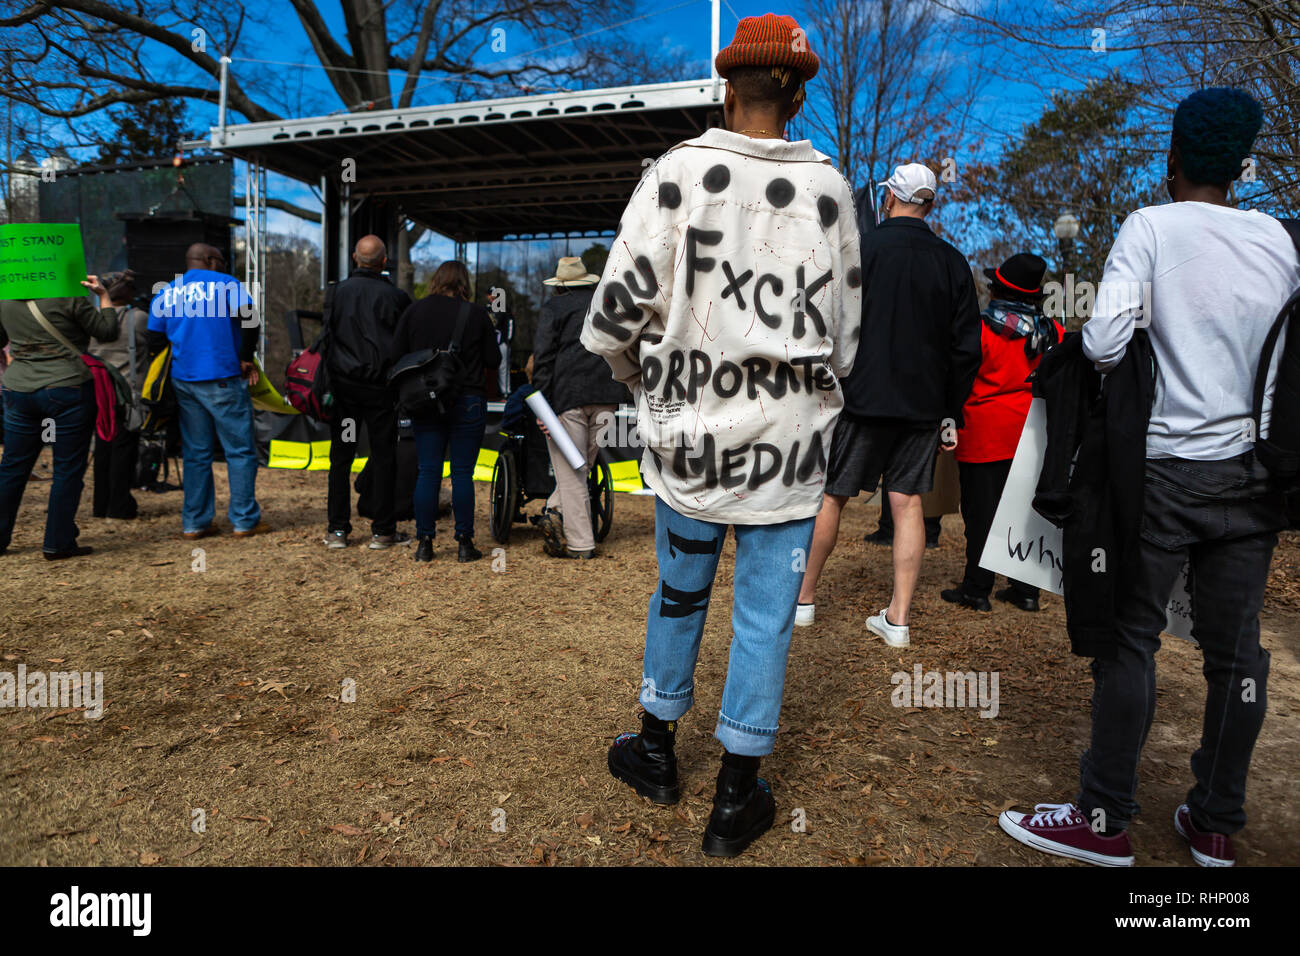 Stone Mountain, USA. 02nd Feb, 2019. On February 2, 2019, an anti-klan coalition, some of who were armed, held an action in Stone Mountain, Atlanta after a ‘White Power' rally disintegrated amid internal strife and safety concerns. Carved into the north face of Stone Mountain is the world's largest Confederate bas-relief sculpture, depicting three Confederate figures, Jefferson Davis, Robert E. Lee, and Thomas 'Stonewall' Jackson. Considered a 'sacred site' to the Ku Klux Klan, opponents have been calling for its removal. Credit: Michael Nigro/Pacific Press/Alamy Live News Stock Photo